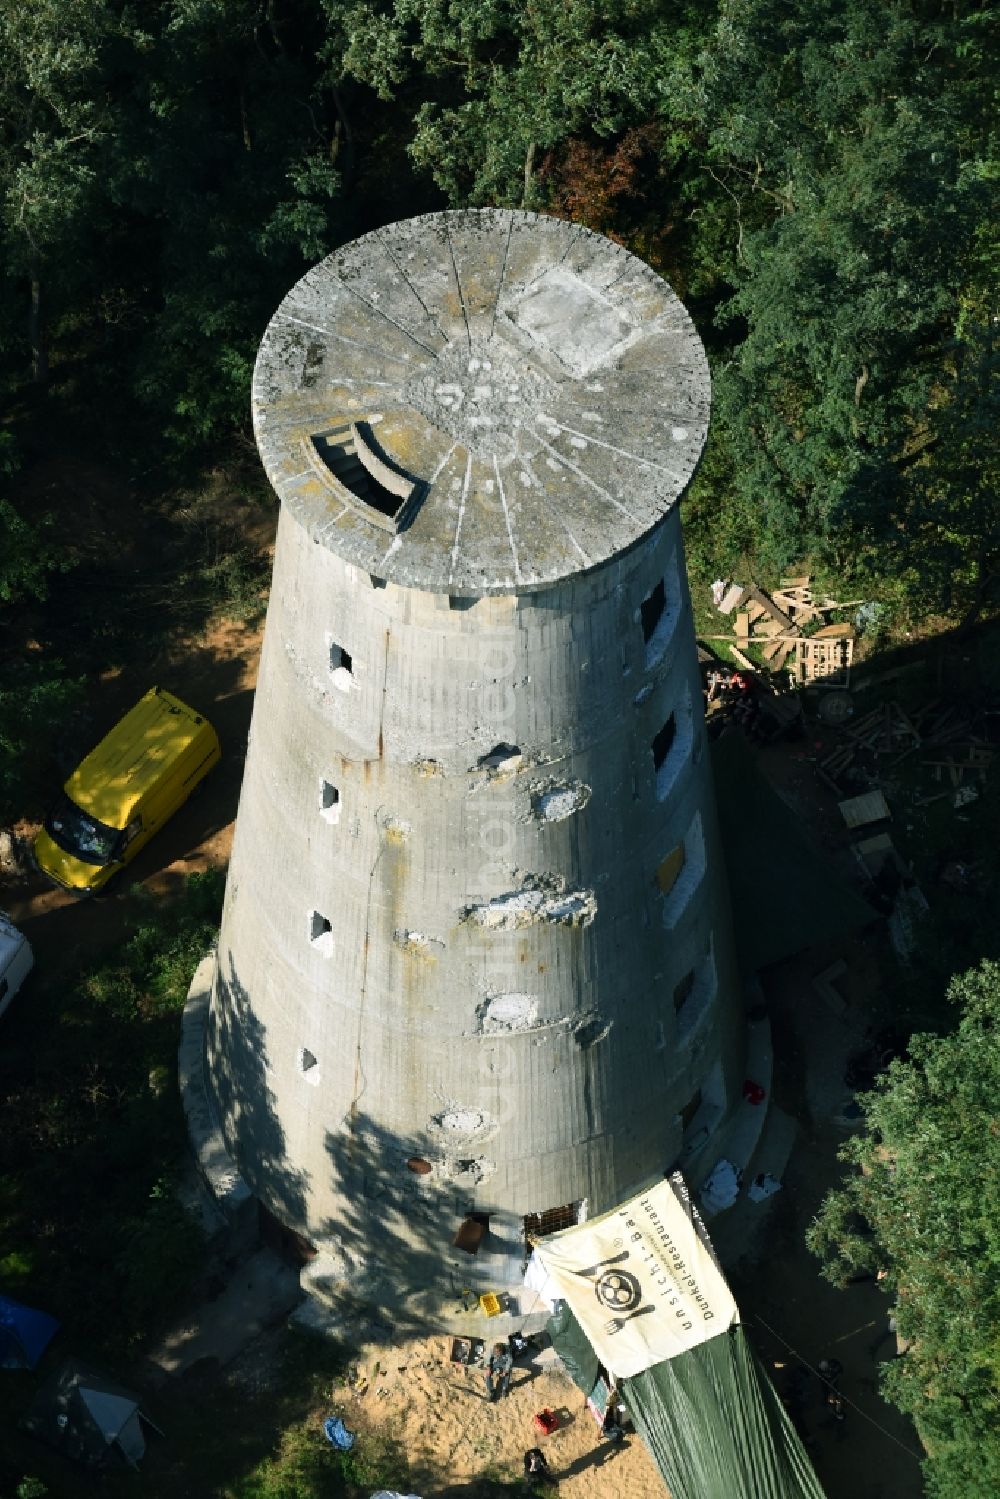 Weesow from above - Reconstruction of the concrete tower of the formally militarily used property Radarturm Weesow in Weesow in the state of Brandenburg, Germany